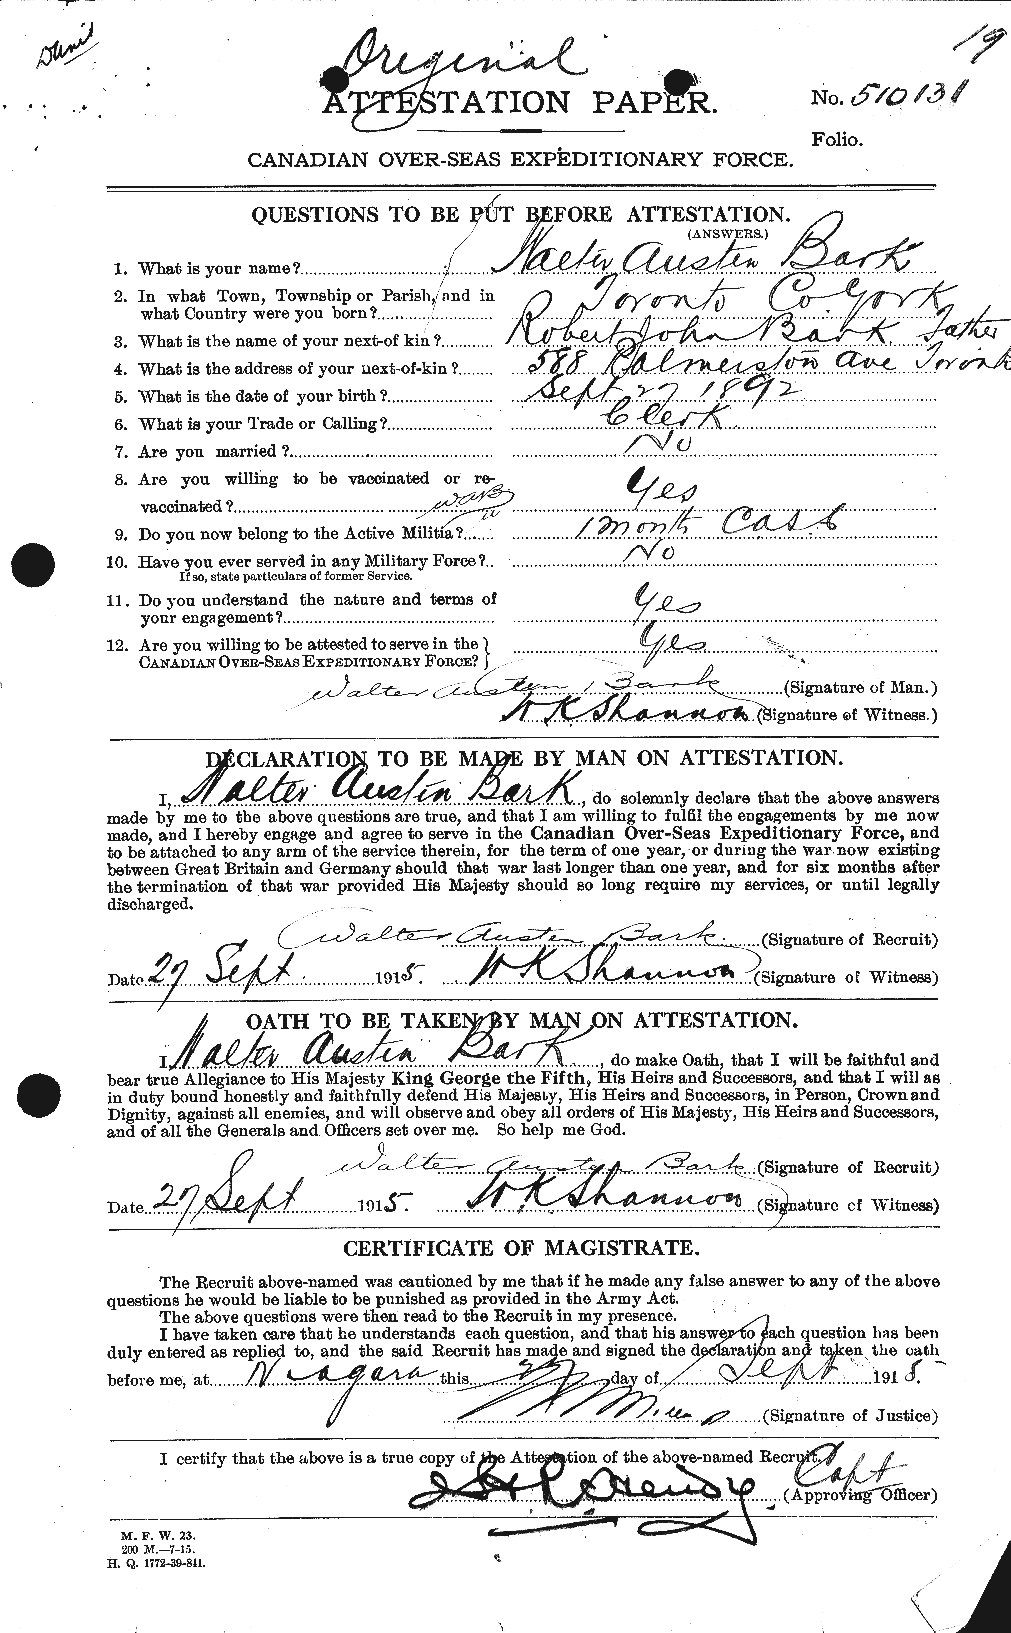 Personnel Records of the First World War - CEF 227665a